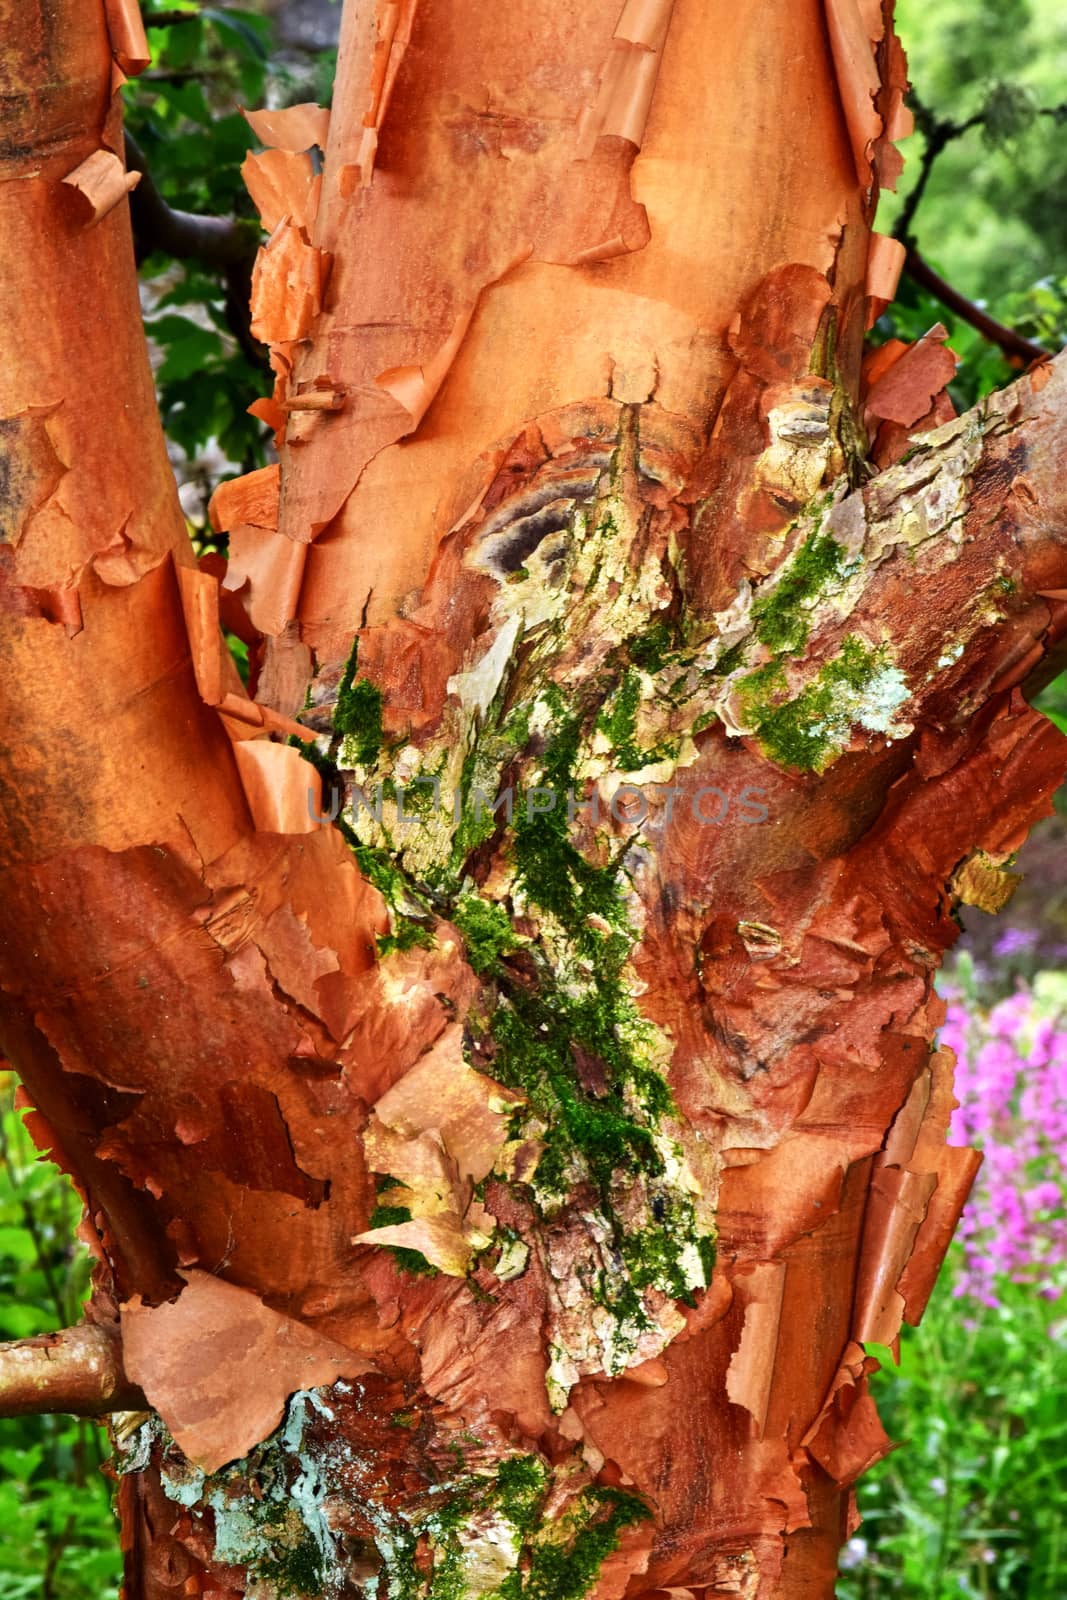 Bark on tree trunk.
Abstract from nature own designs.